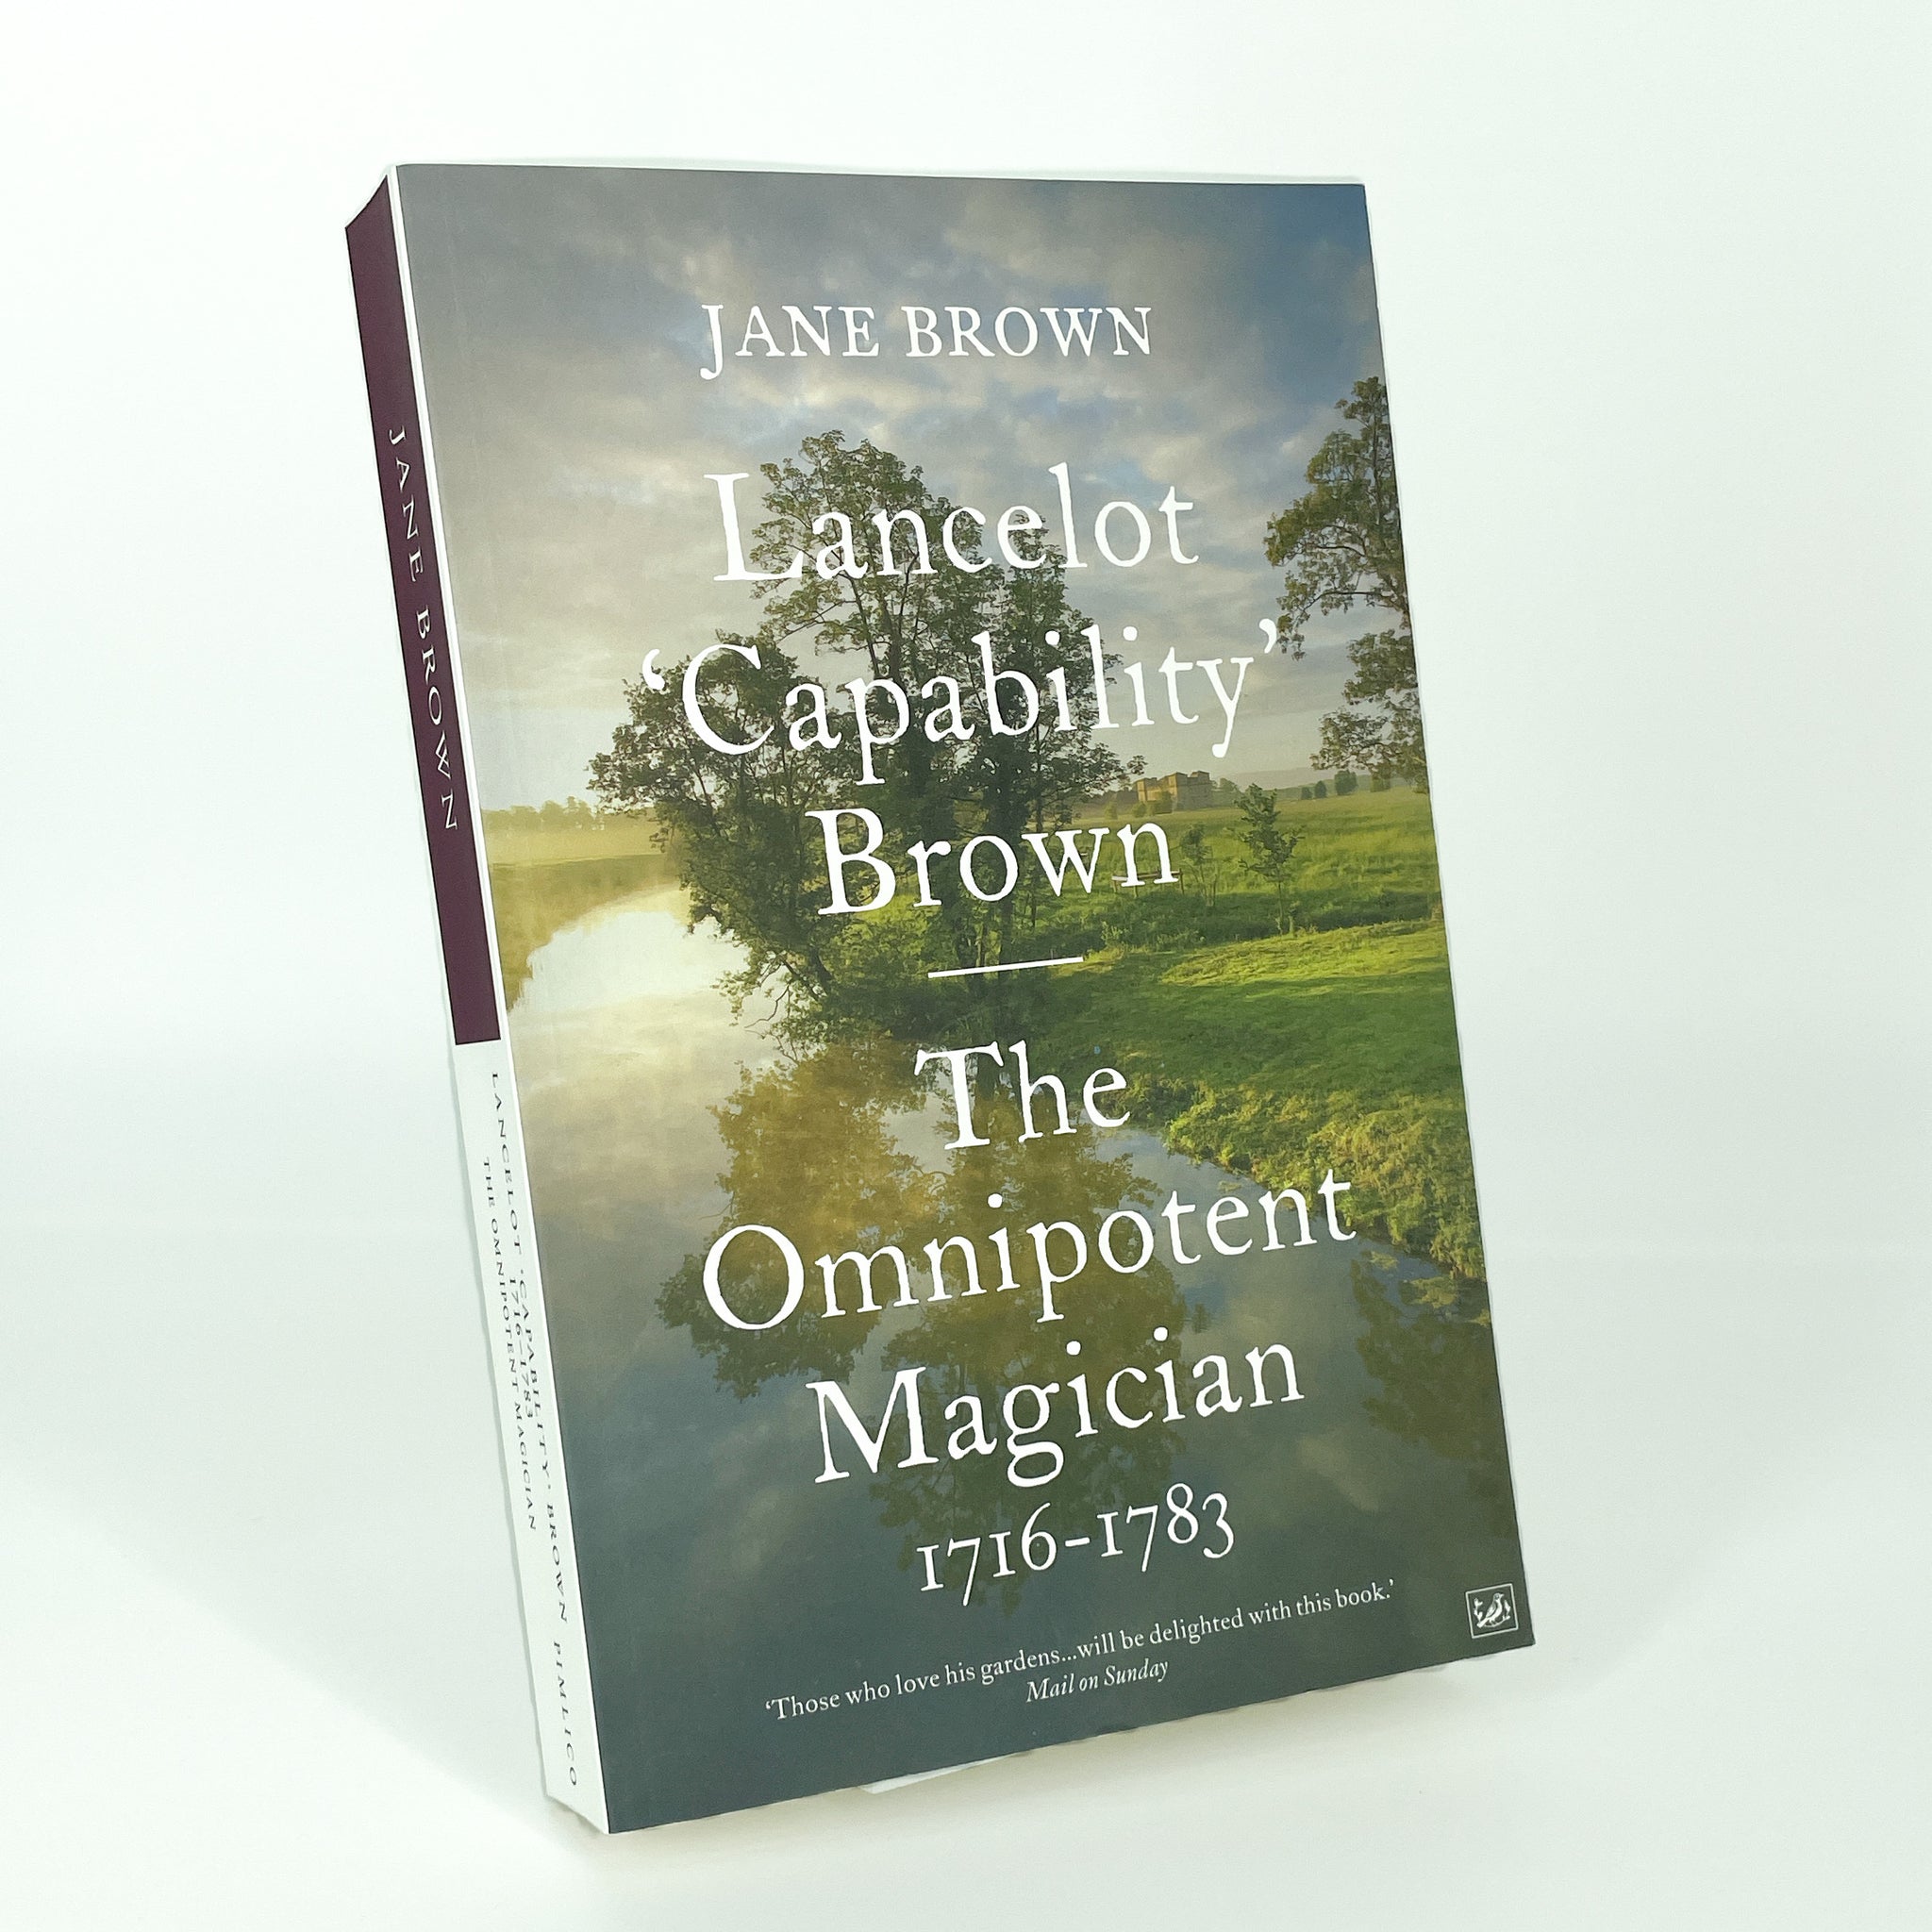 Lancelot "Capability" Brown - The Omnipotent Magician 1716-1783 by Jane Brown